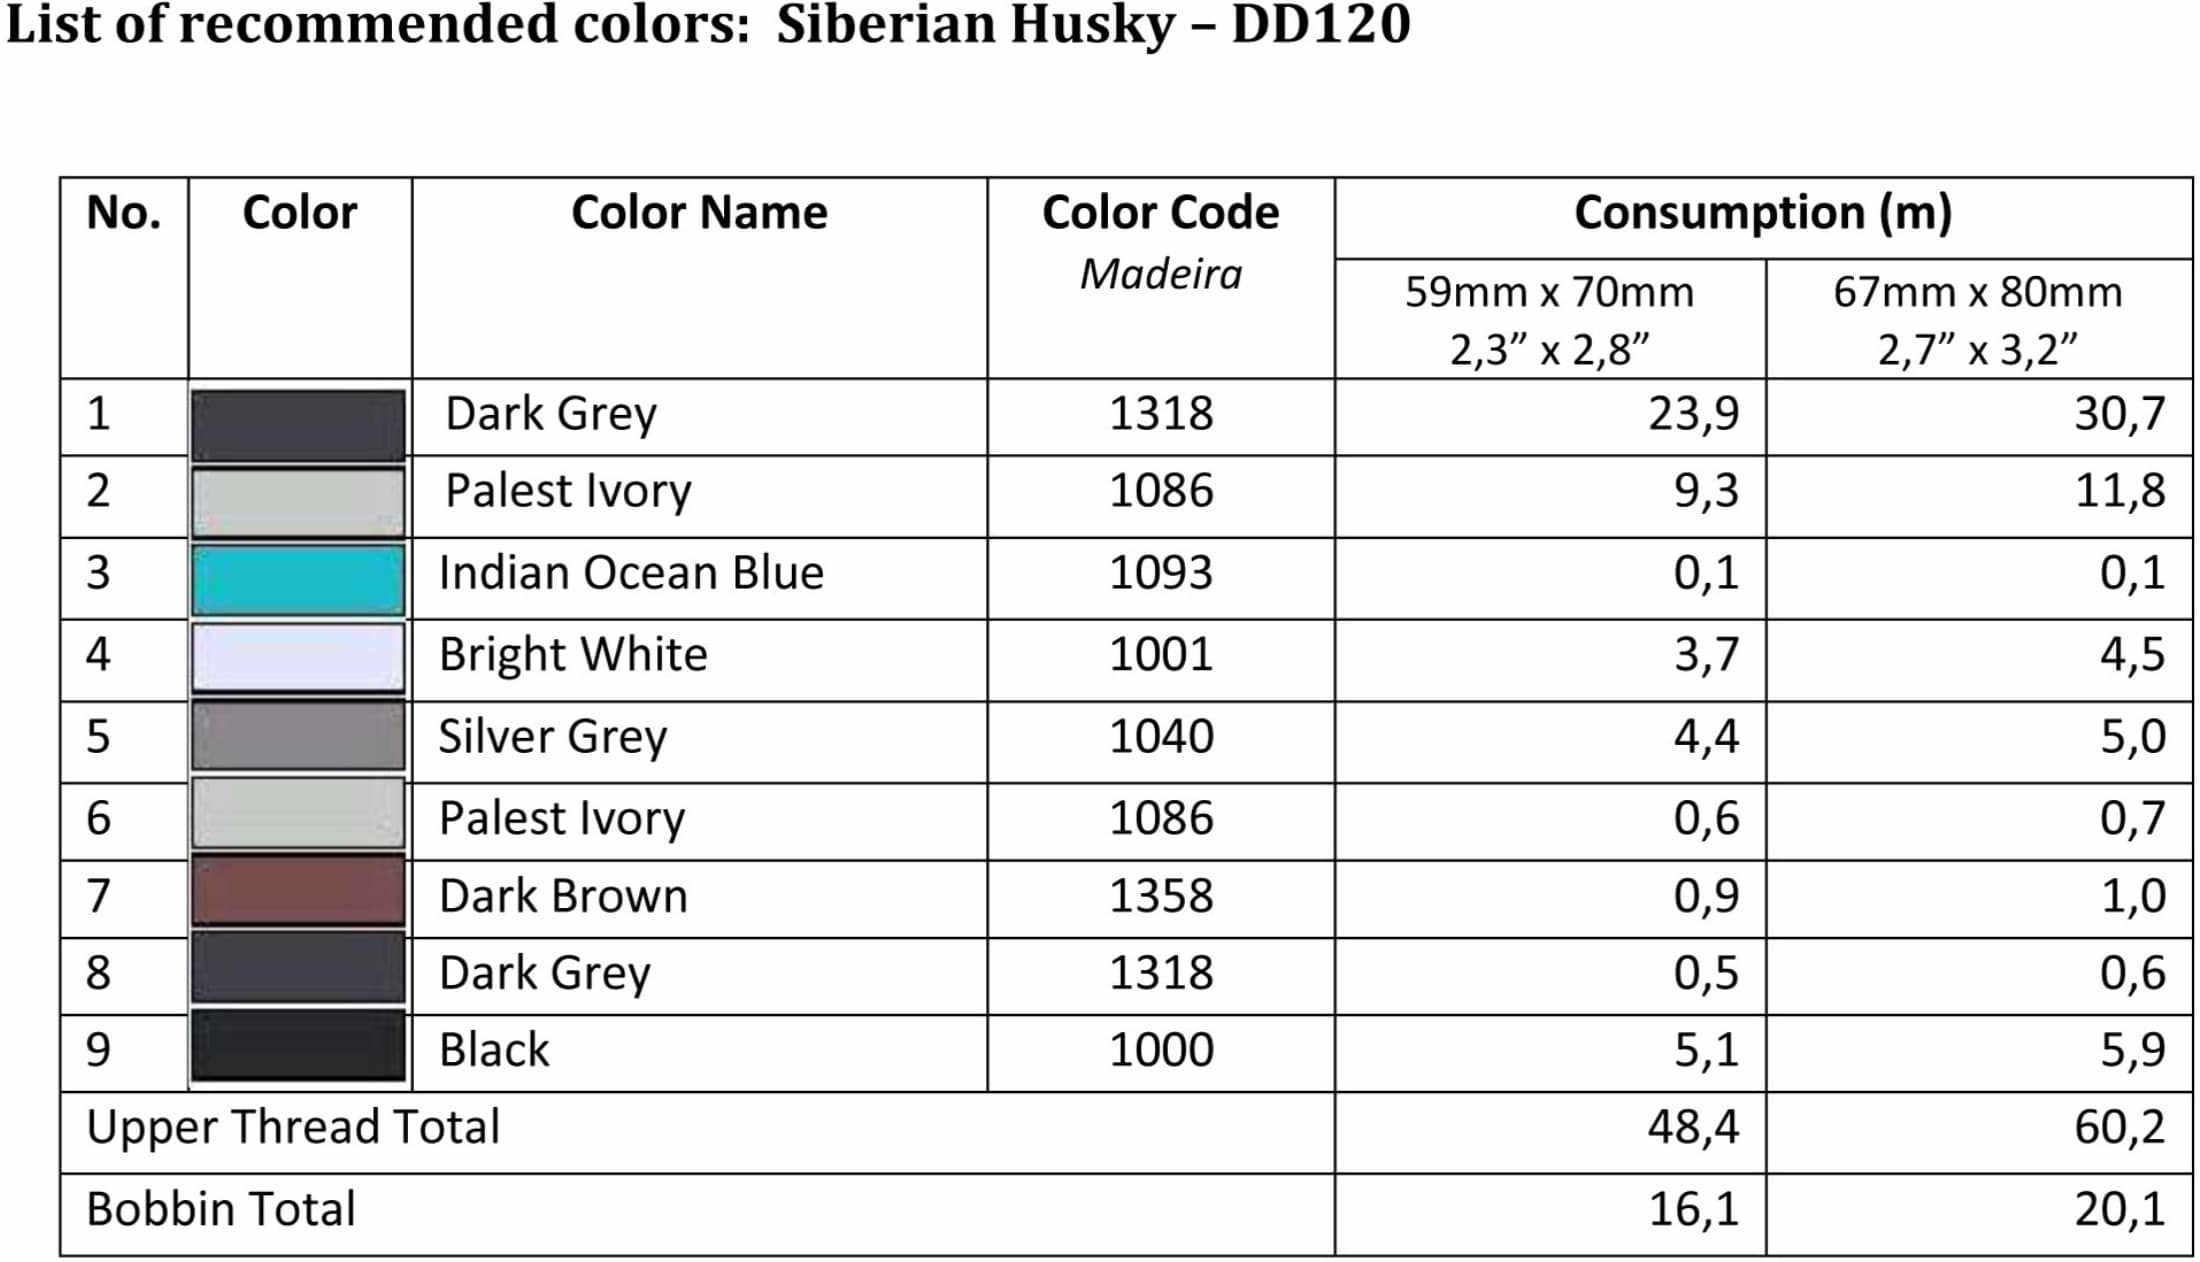 List of Recommended Colors - Siberian Husky DD120